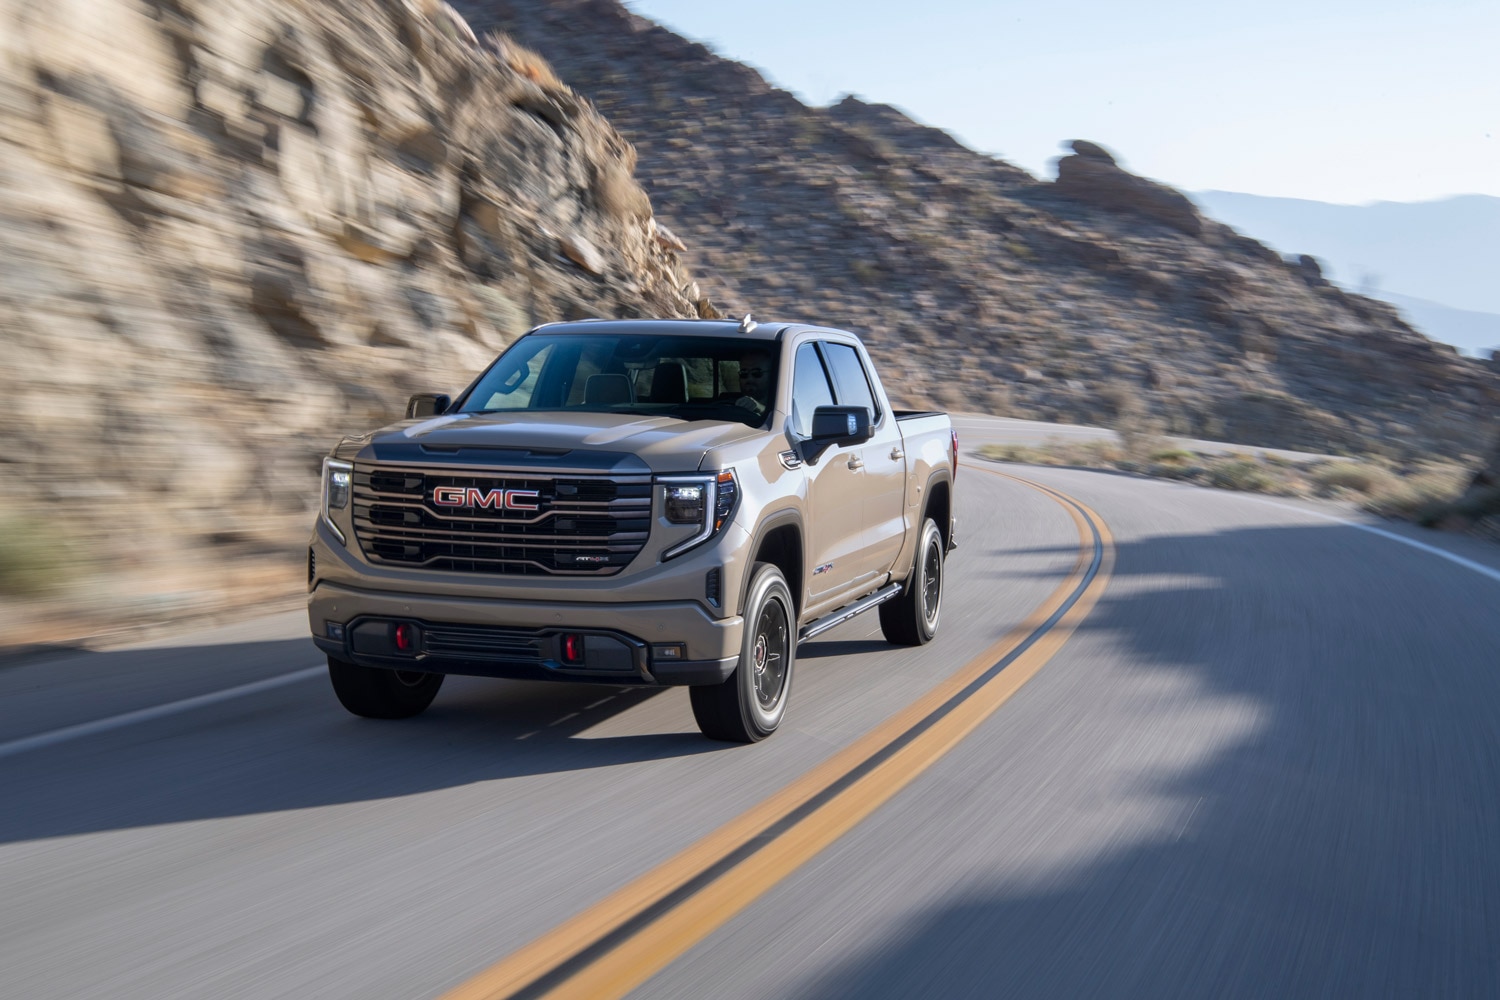 2023 GMC Sierra 1500 driving along a winding road in the mountains.